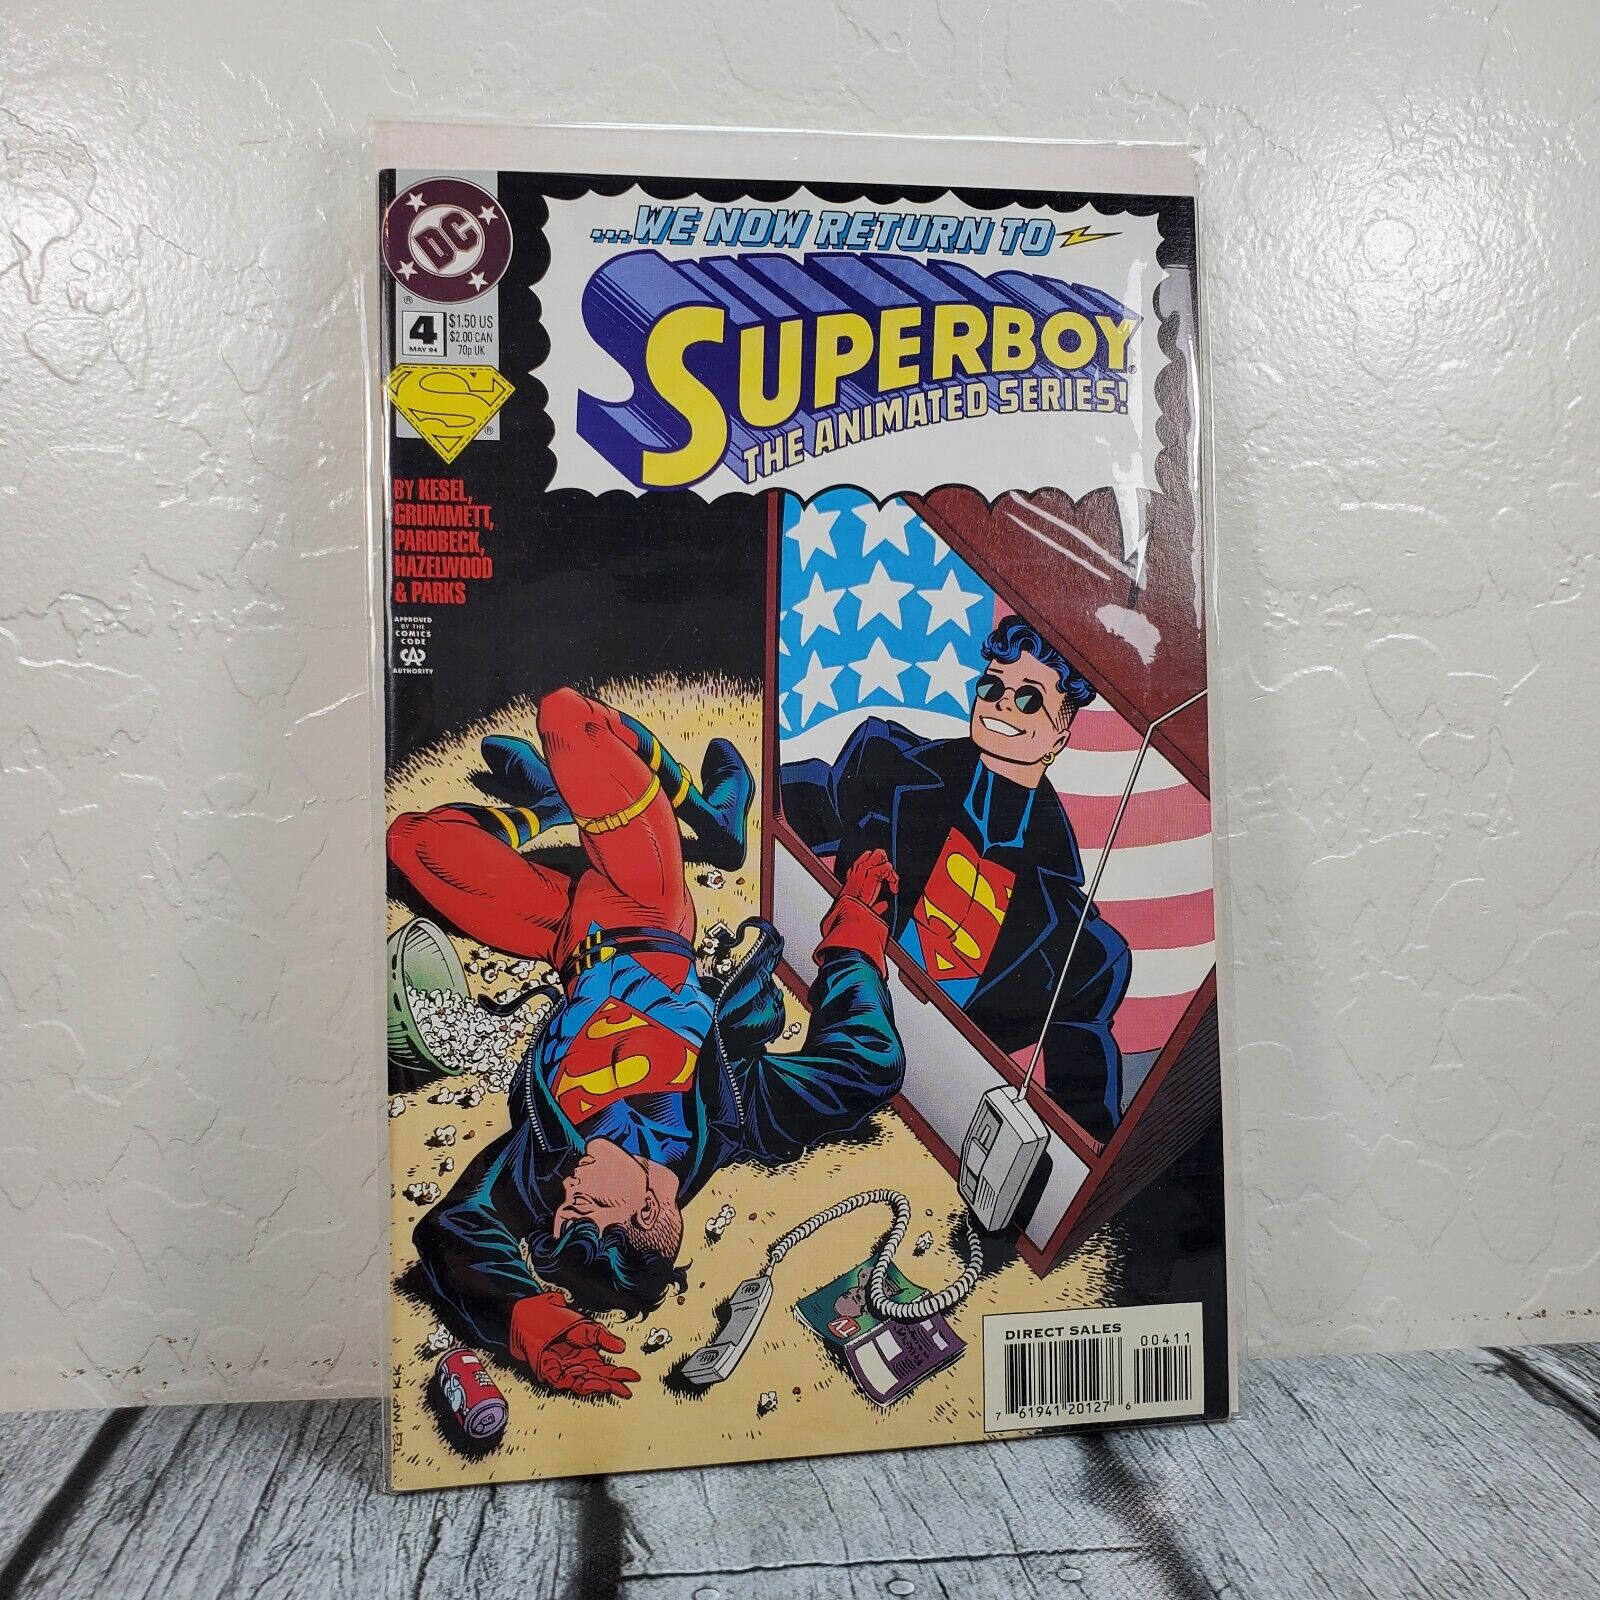 DC Comics Superboy #4 1994 Animated Series Vintage Comic Book Sleeved Boarded